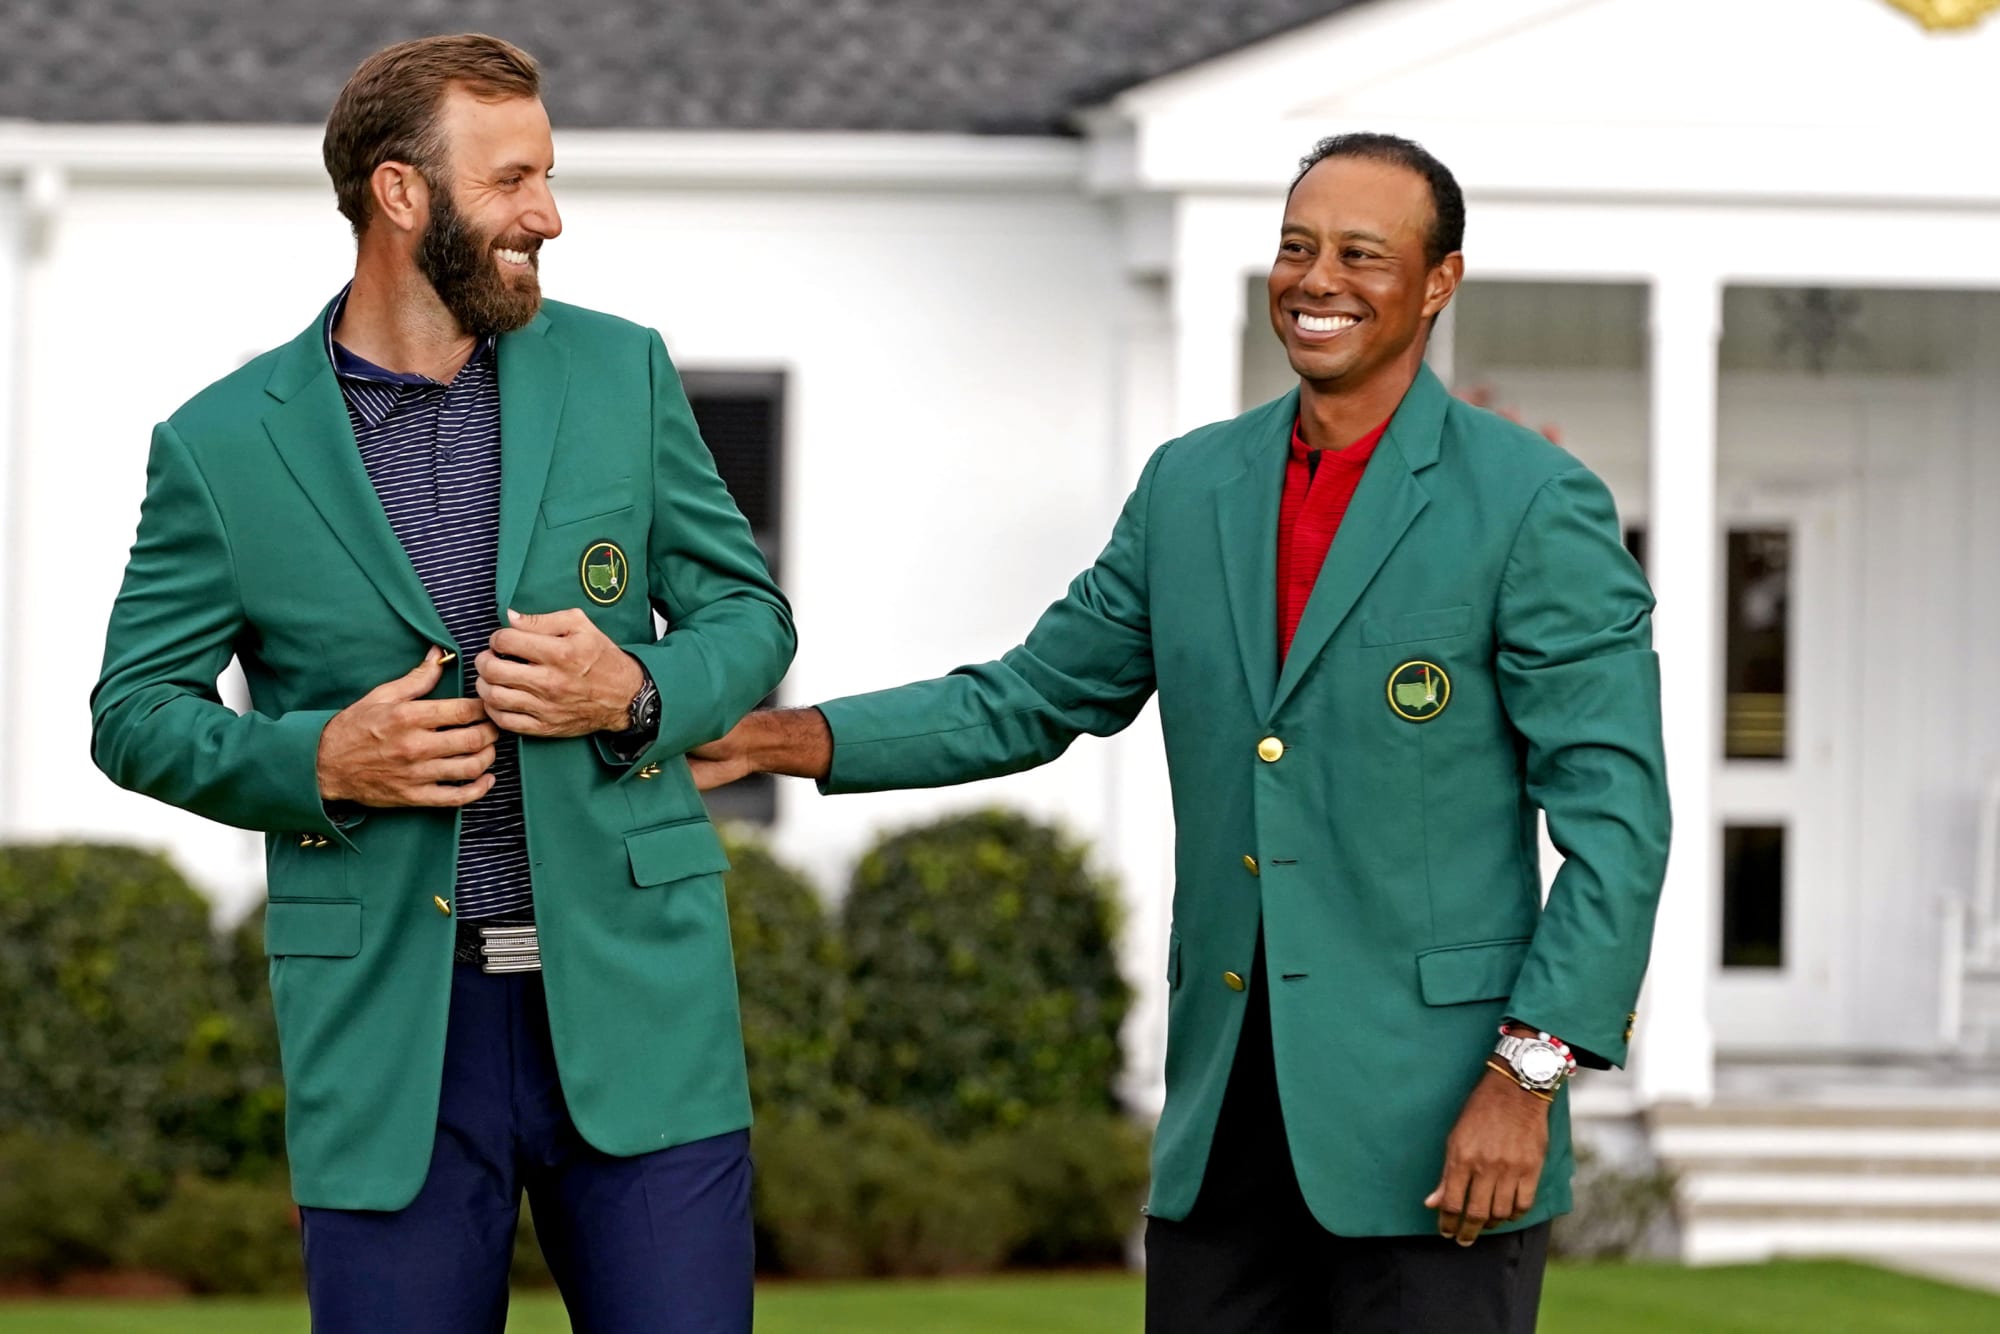 Notable player histories at Augusta National Golf Club